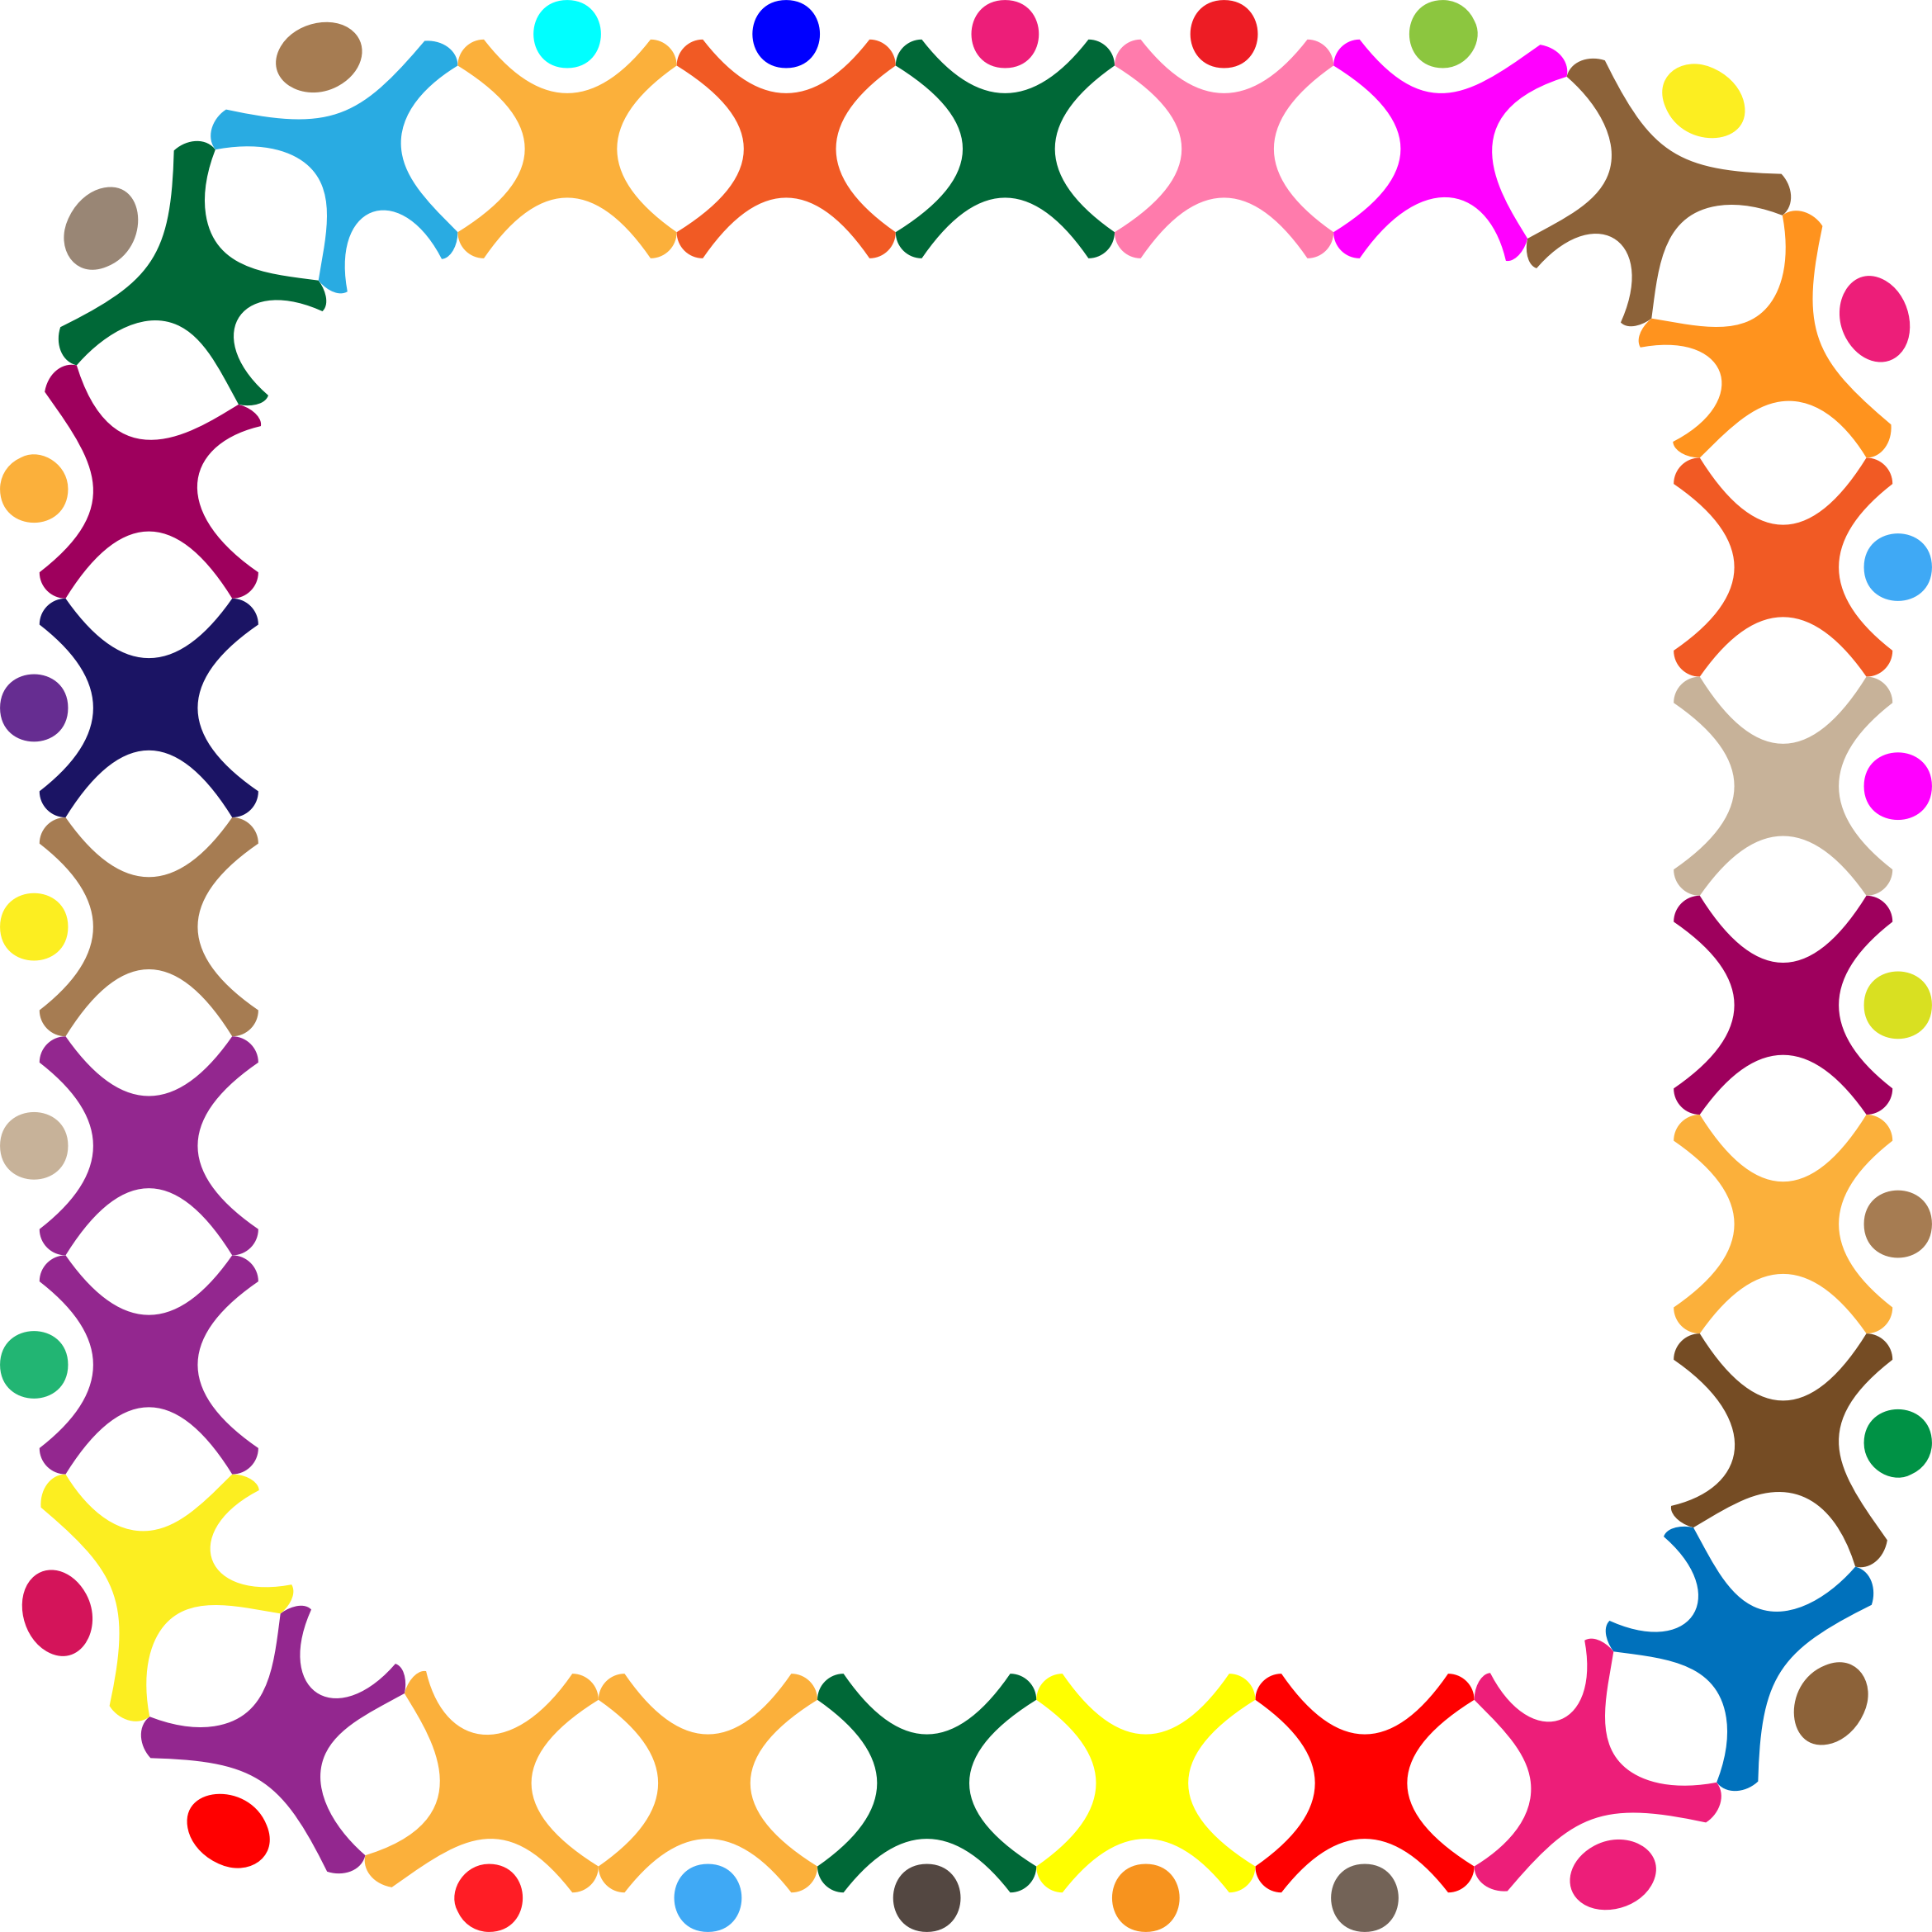 Colorful Gear Border Frame PNG